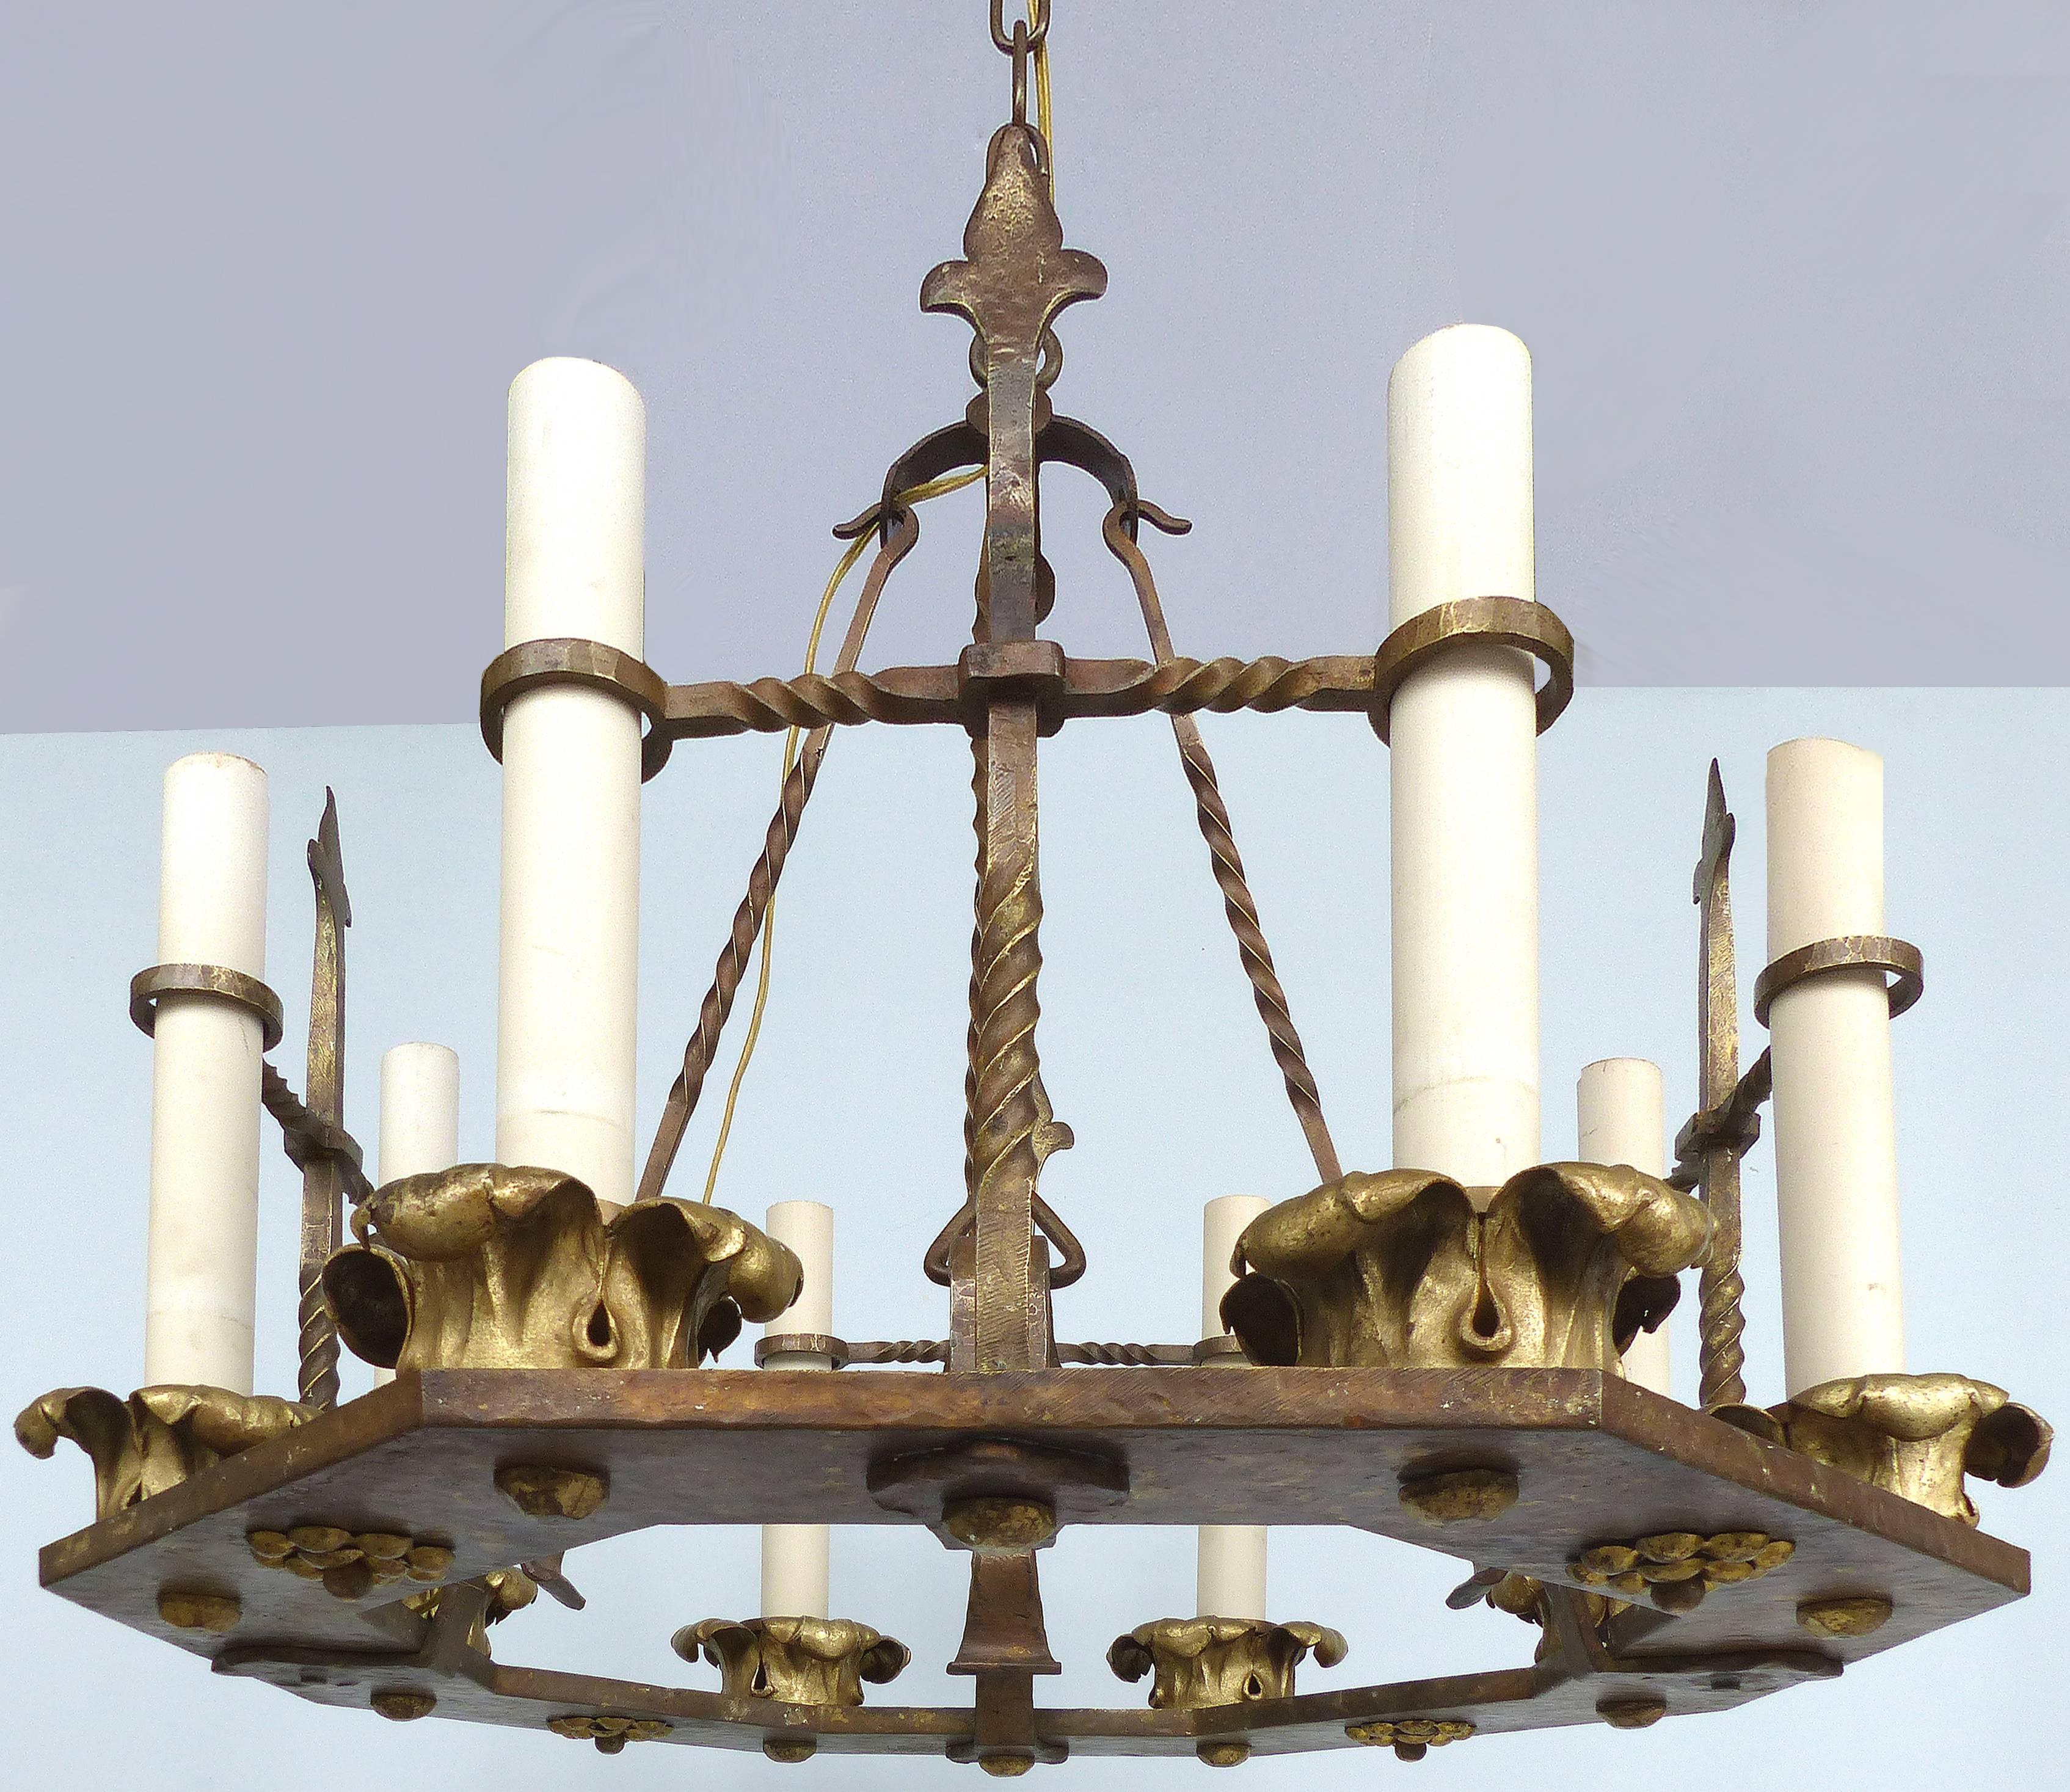 Antique Twelve-Light Forged Iron and Brass Chandelier

Offered for sale is an early 1900s antique forged iron twelve-light chandelier with brass acanthus leaf bobesches. The fixture is hexagonal with four twisted iron hanging rods which rise to a